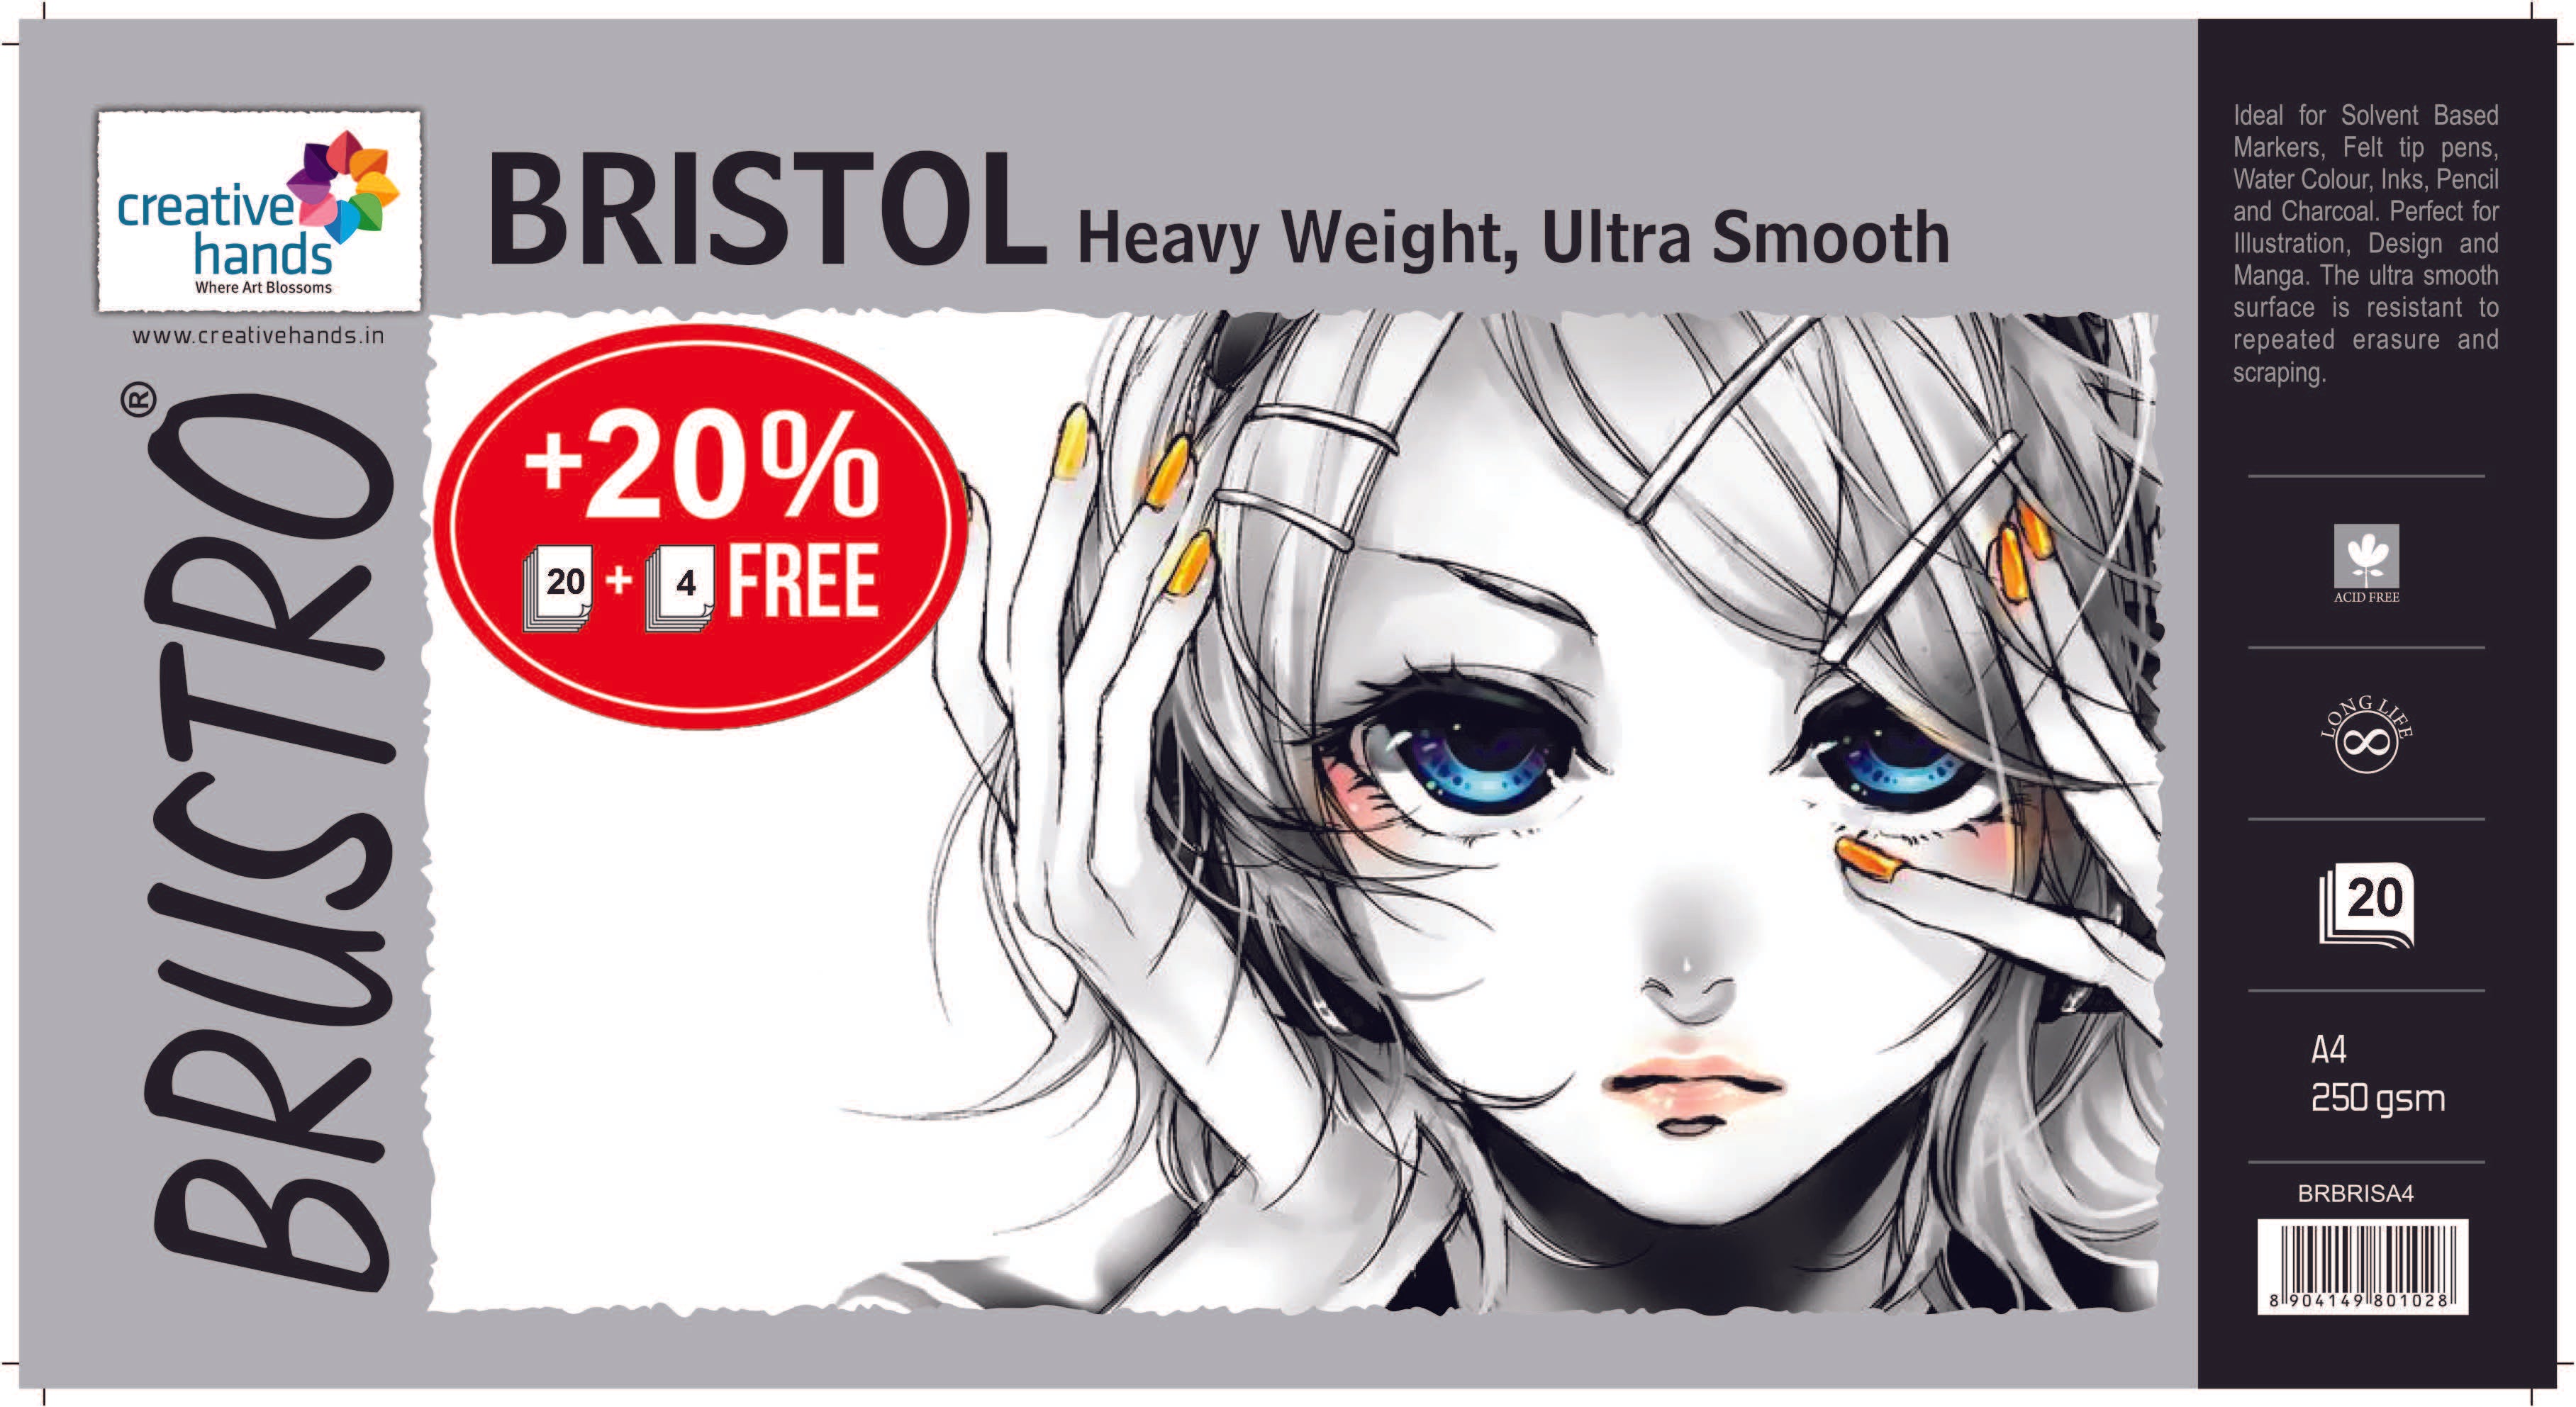 BRuSTRO Bristol Jumbo (50 Sheets), Unruled, A4, 250 gsm  Drawing Paper - Drawing Paper